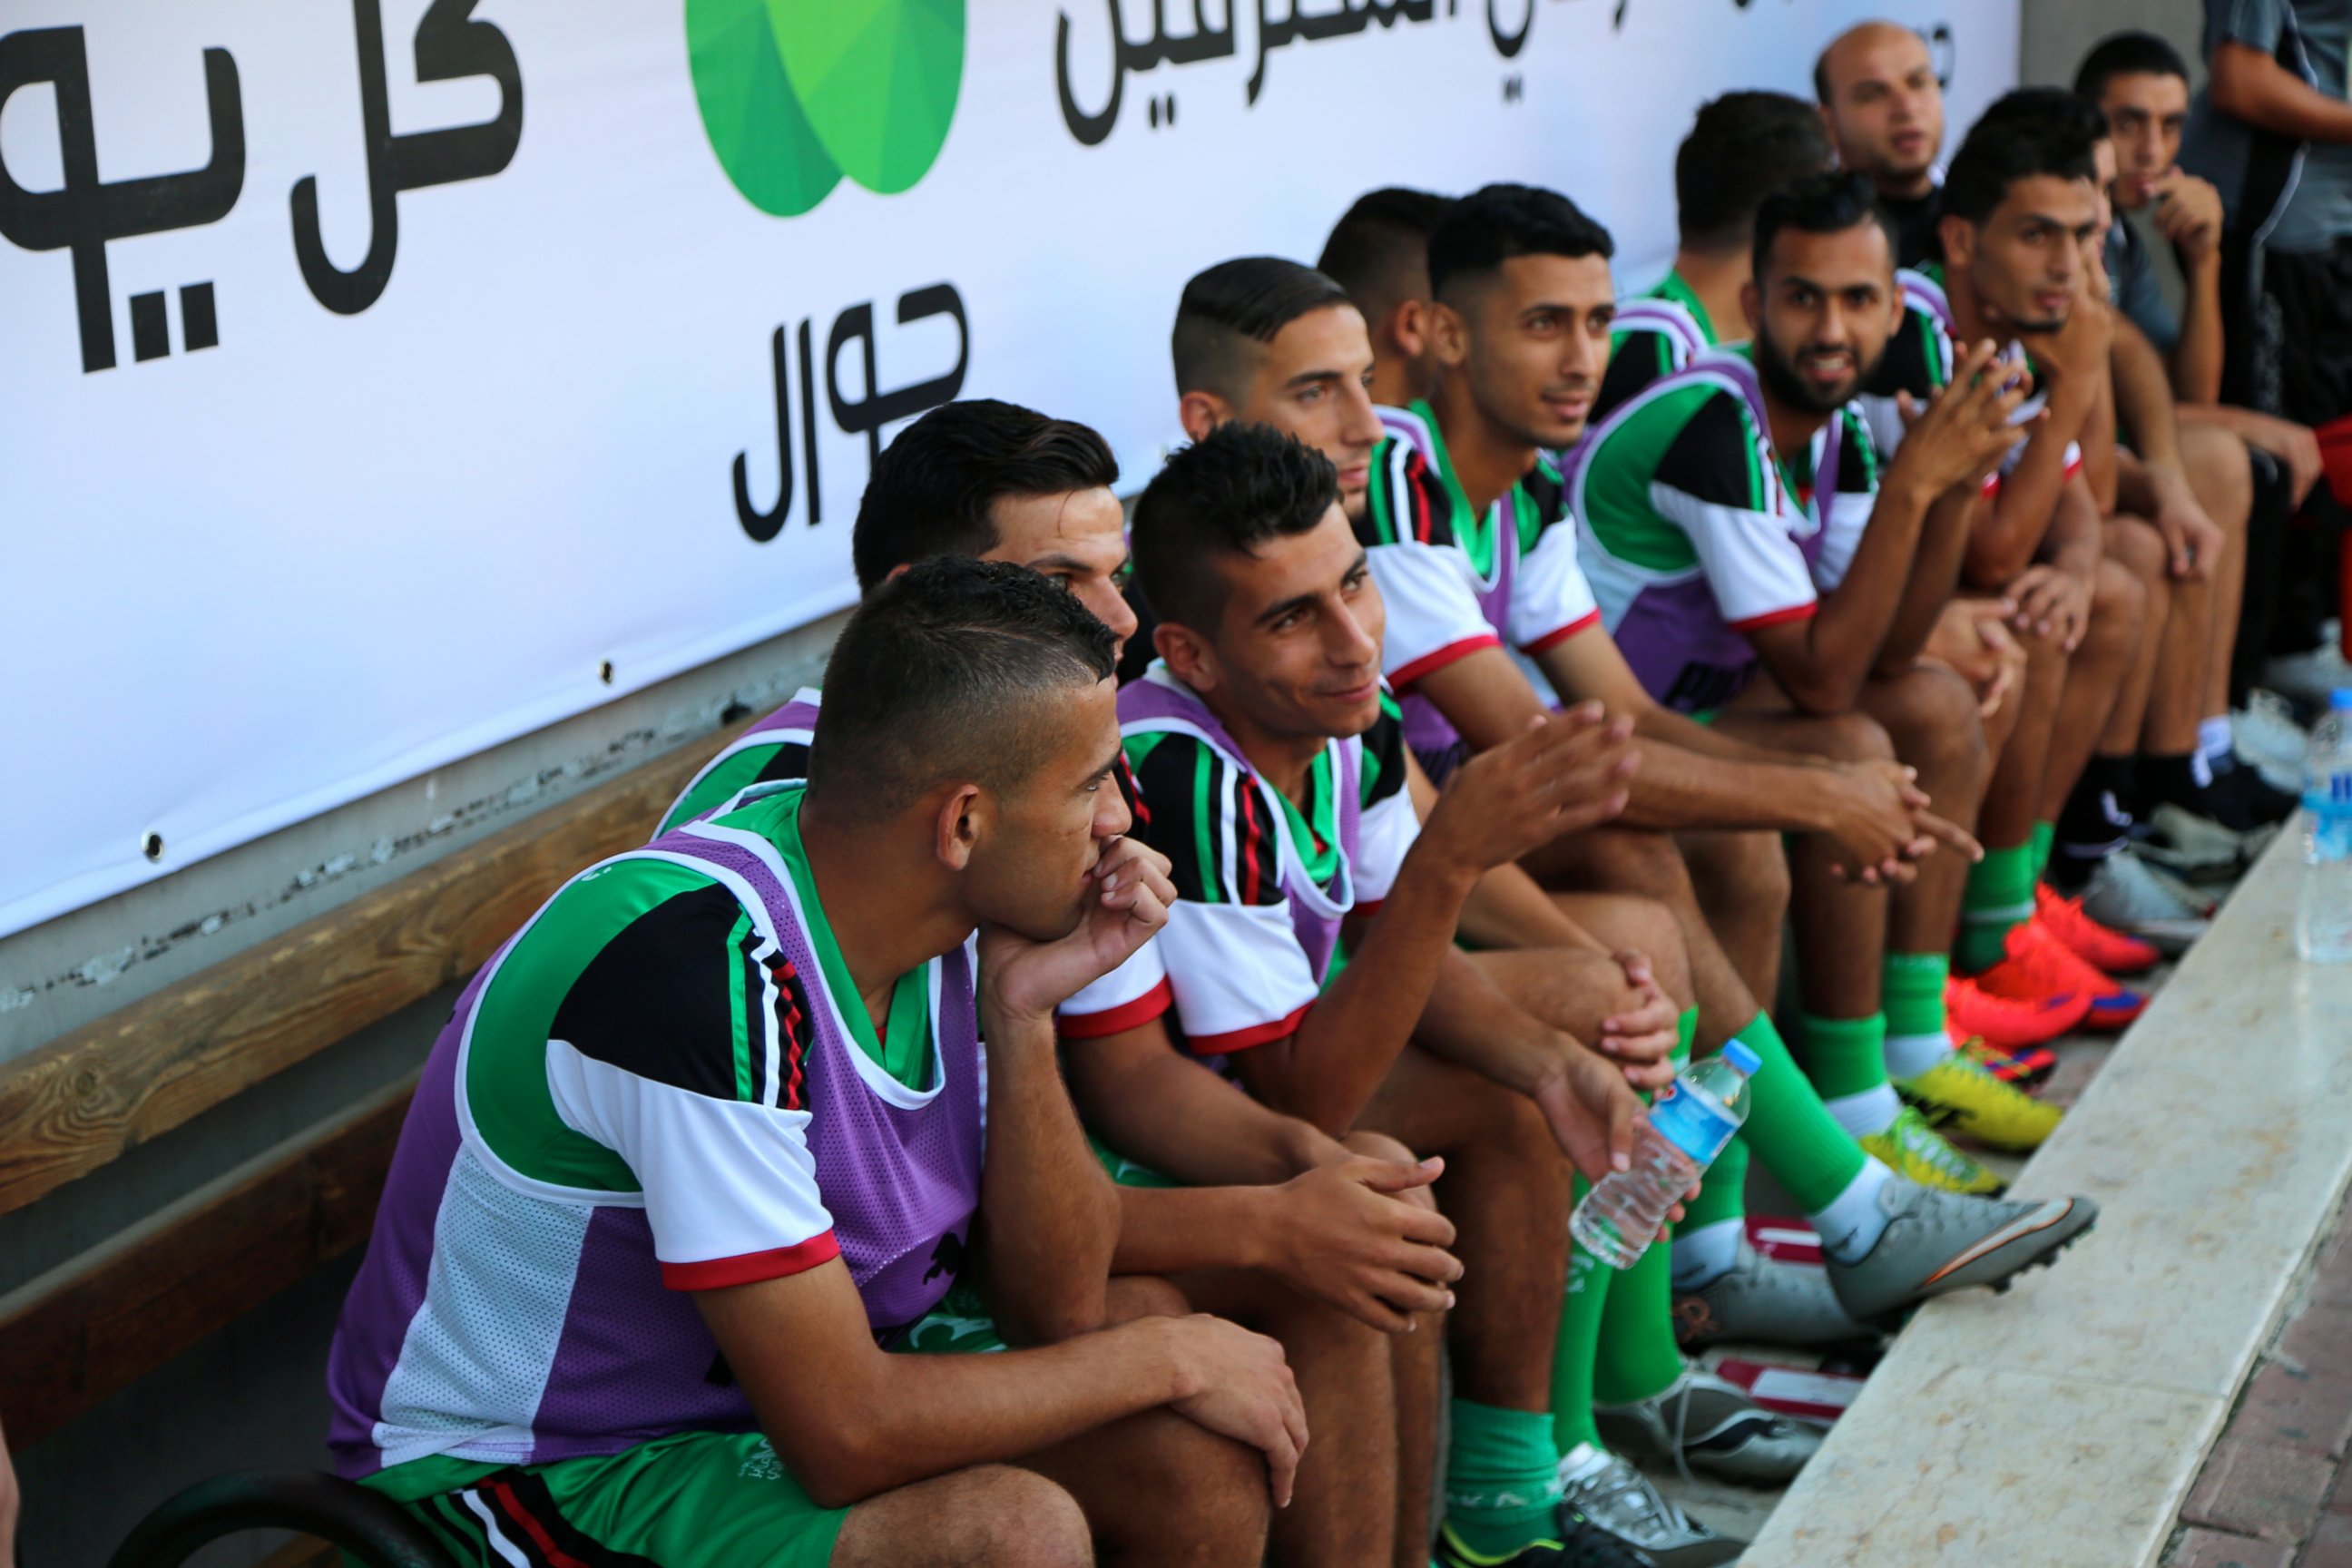 PHOTO: The Shuja'iiya Football Club before the match started. They would lose 1-2 to Hebron's Al-Ahly team. 